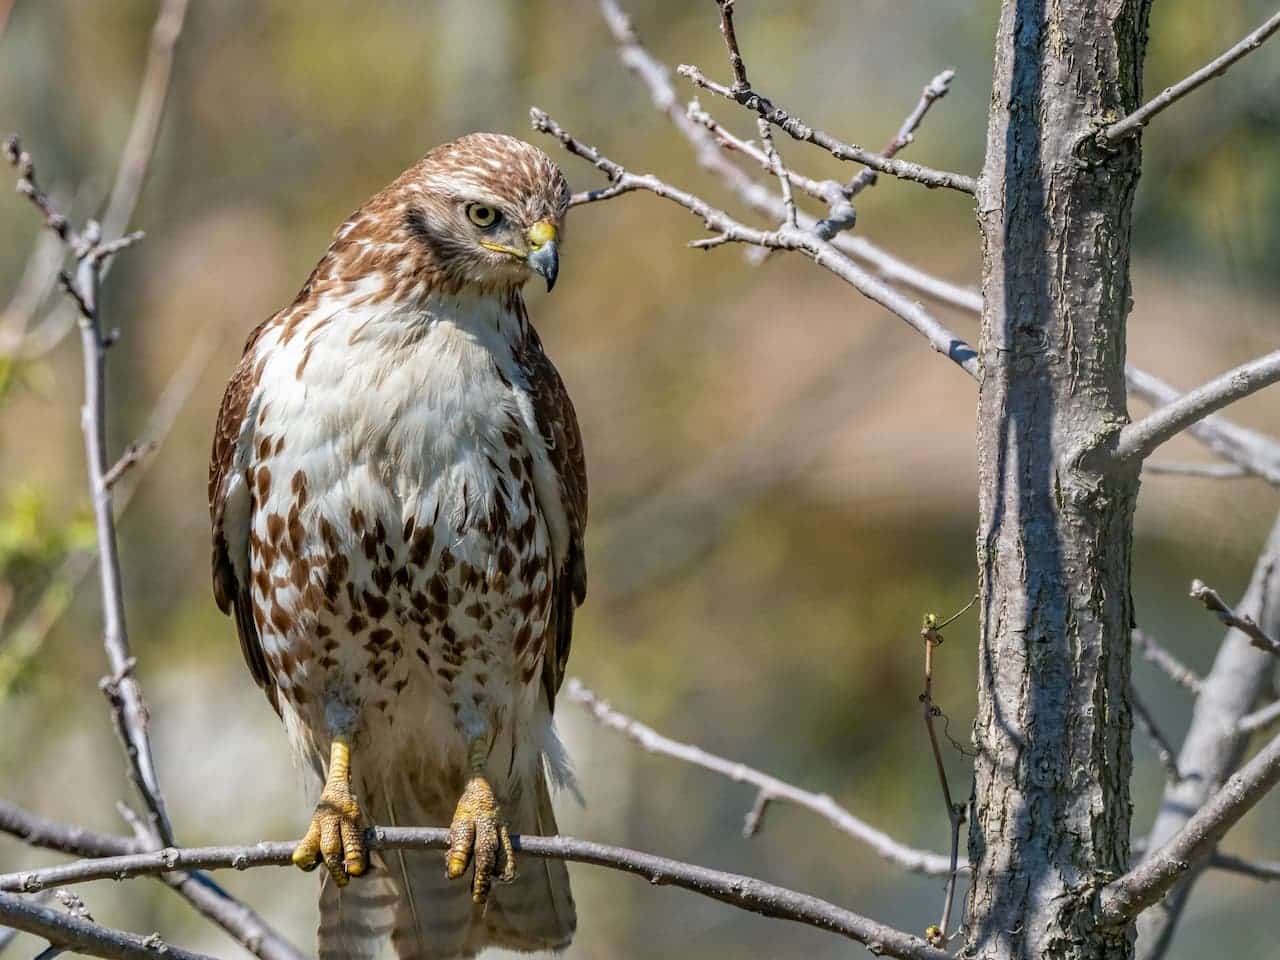 A Red-tailed hawk sitting on a tree branch in the forest alone.